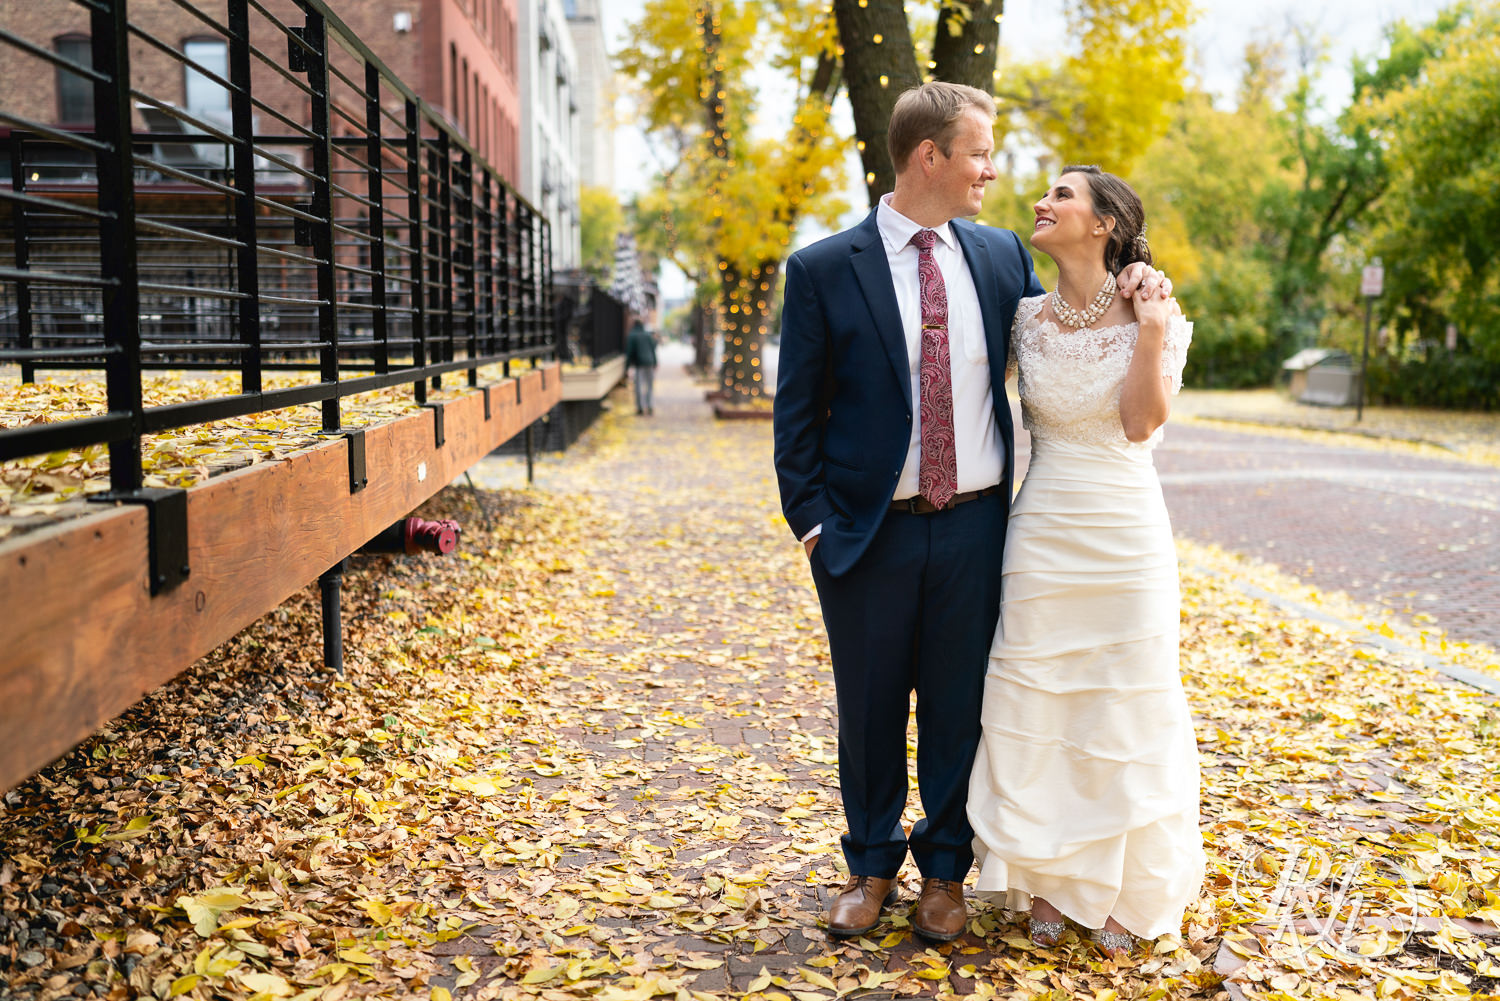 Bride and groom smile in fall leaves in Saint Anthony Main in Minneapolis, Minnesota.